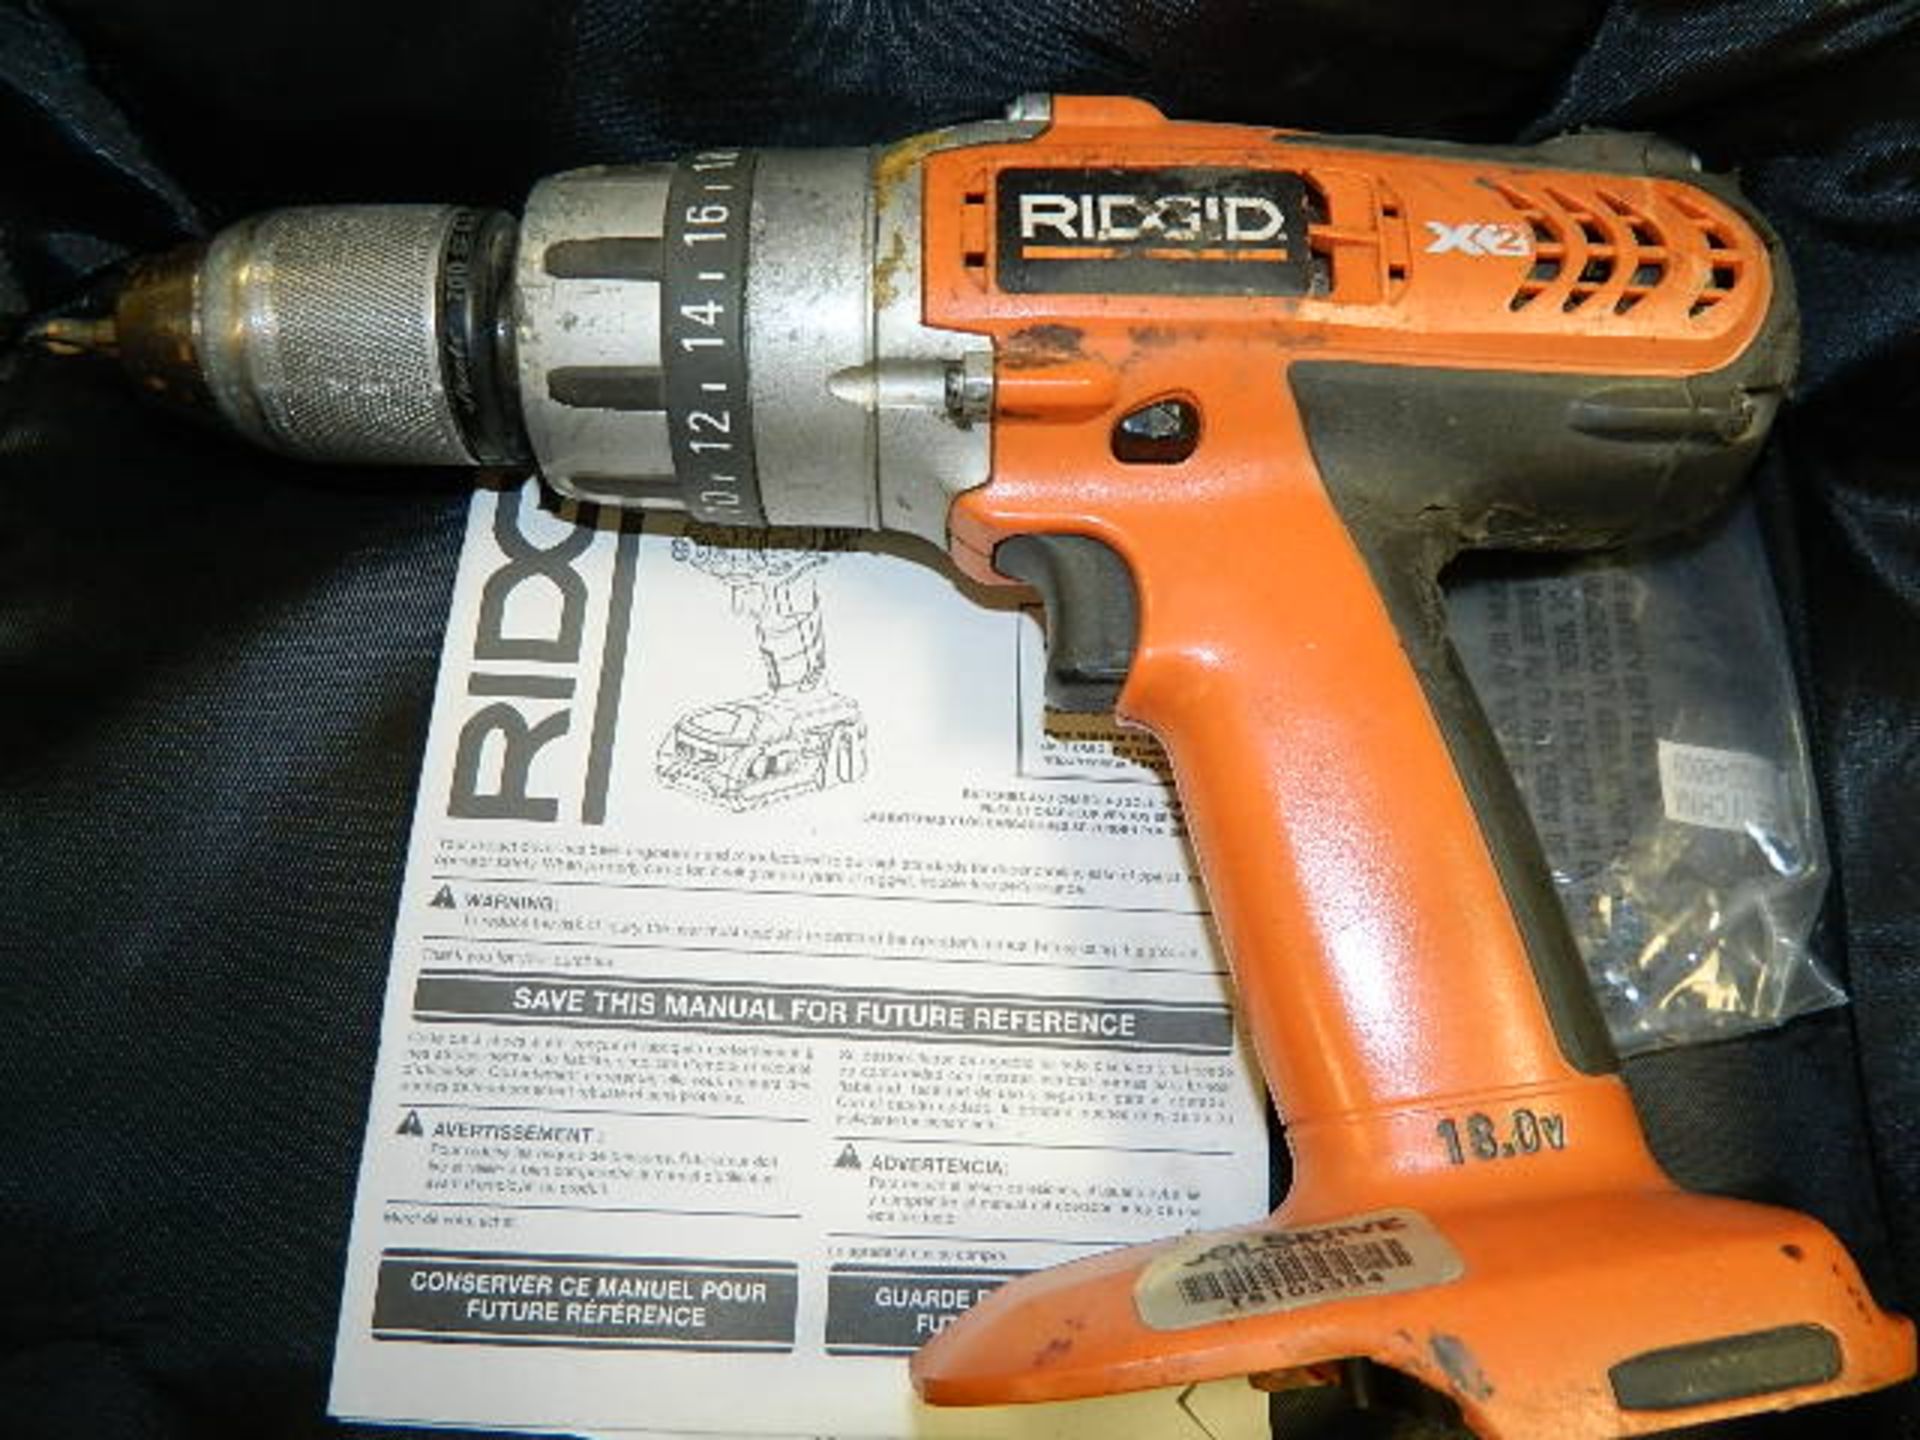 Chicago Electric 1/2" Impack Wrench #31877, 120V. AC/DC 7A. Ridgid 18V. Drill No Battery Or Charger - Image 2 of 2